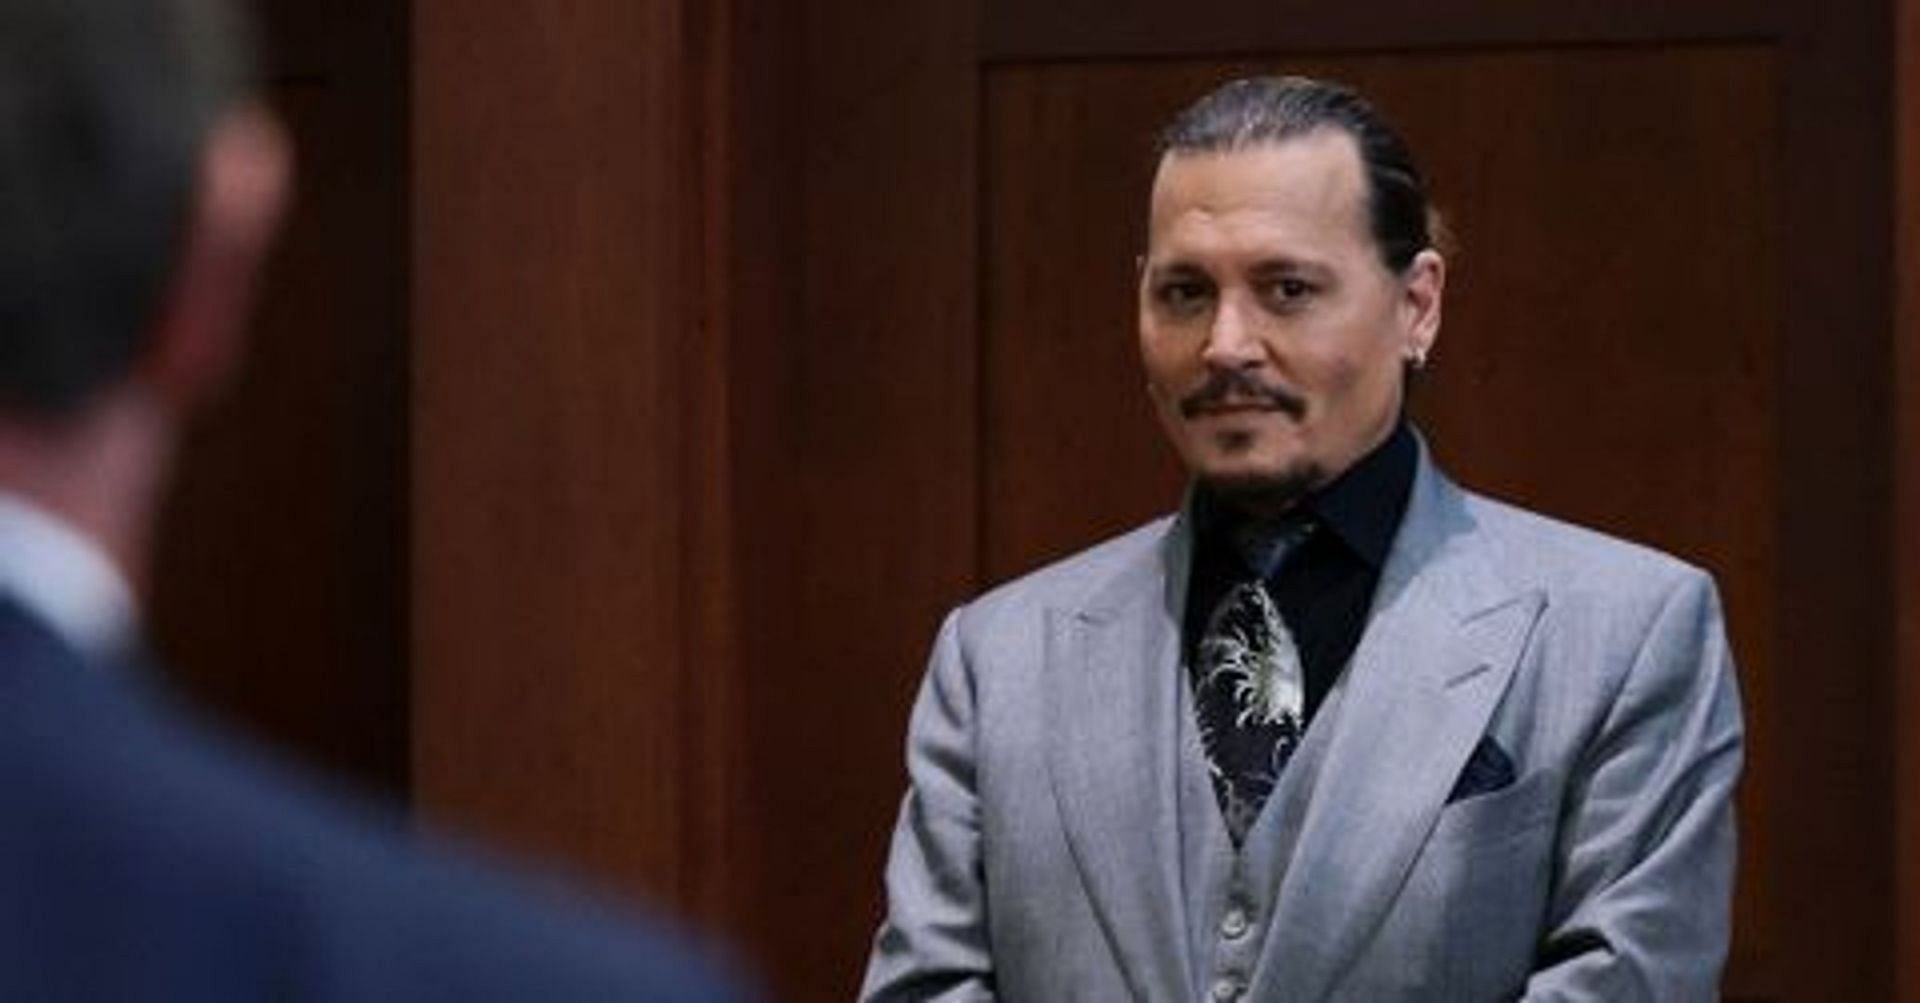 Why does Johnny Depp speak with an accent? Origins explored 